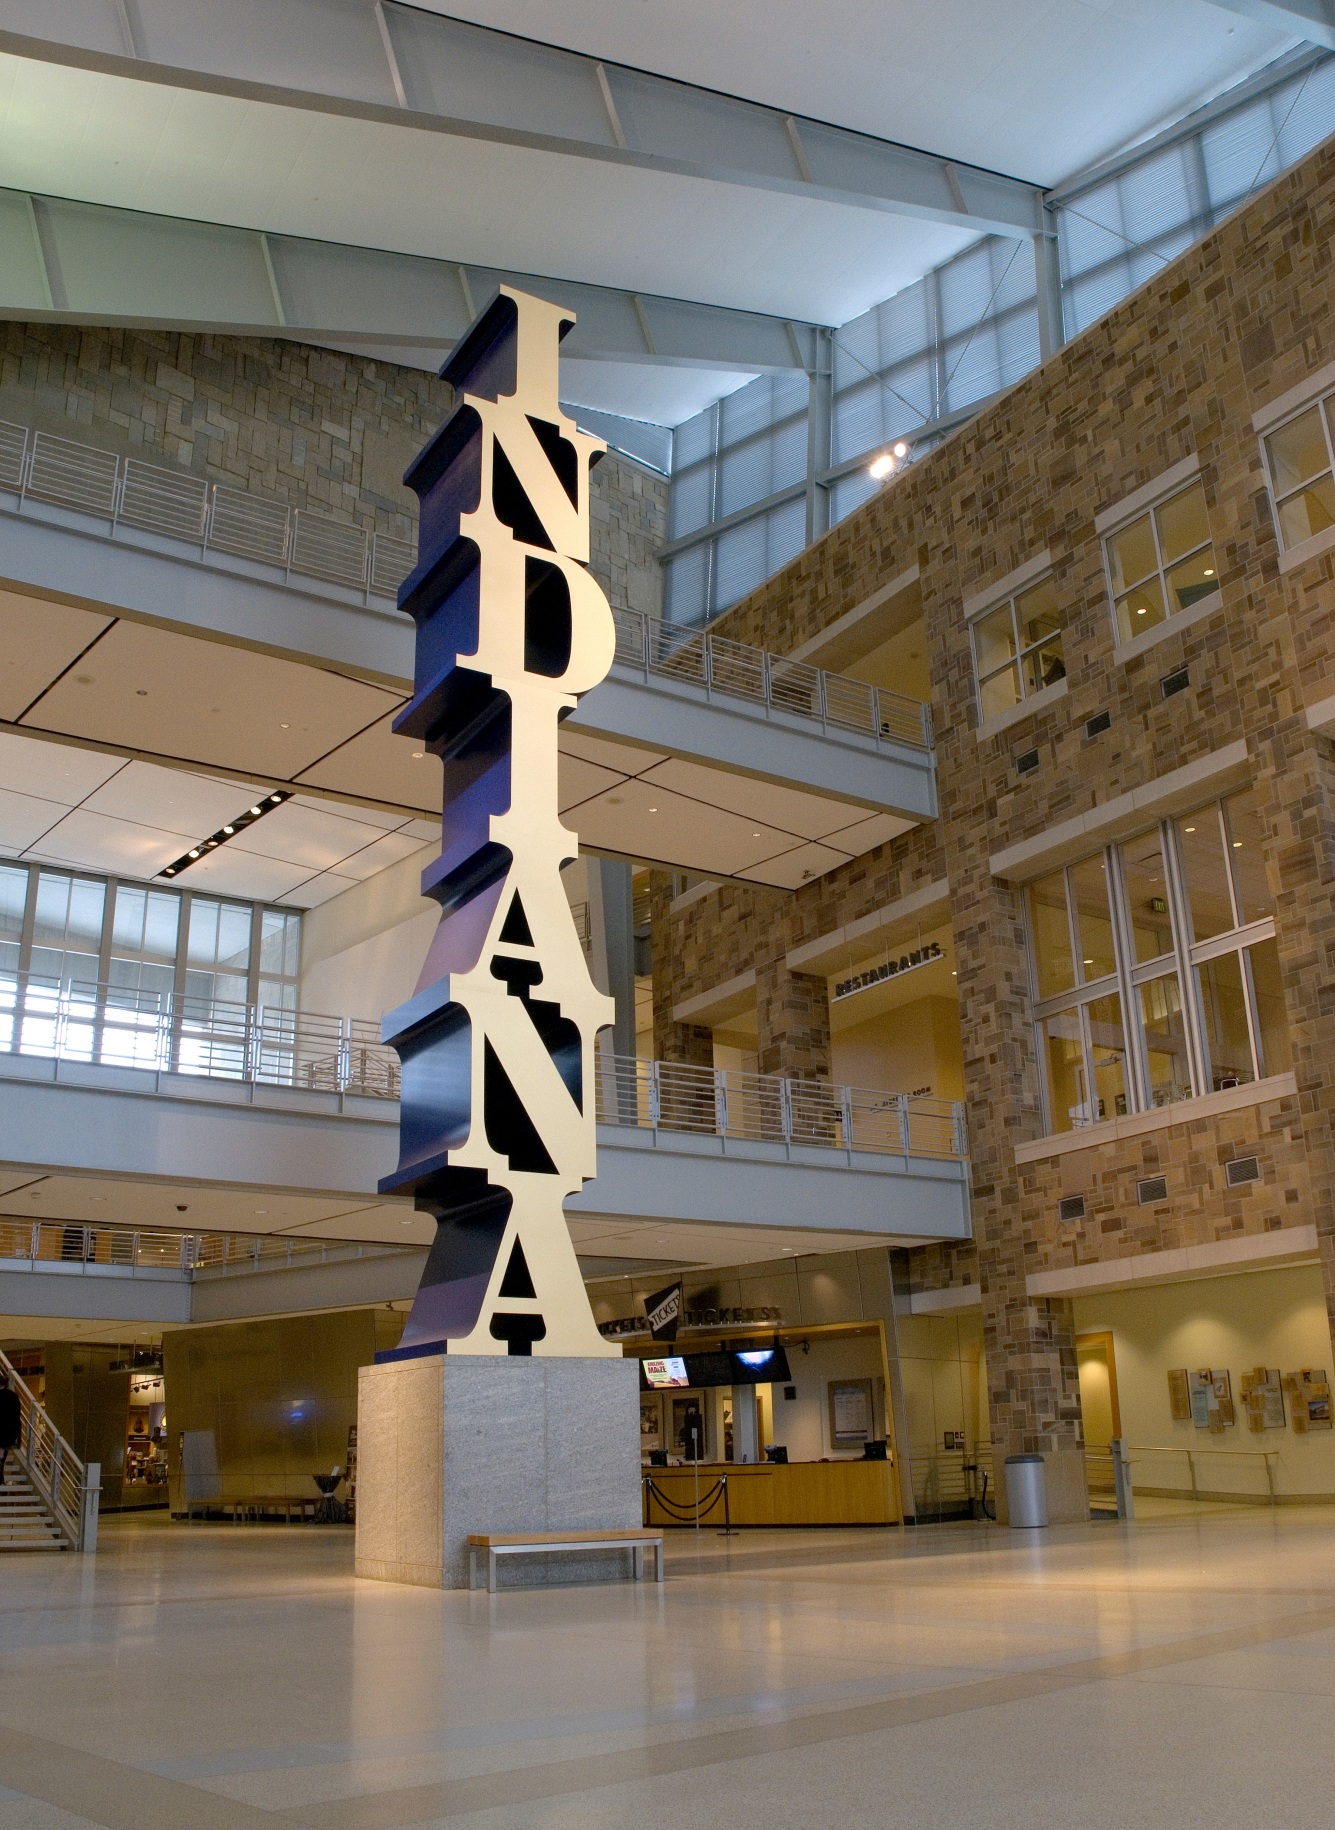 The Indiana Obelisk is a 575 1/4 inch high, with base, polychrome aluminum sculpture spelling the word Indiana vertically, starting with the I on top and ending with the A on the bottom. The letters have gold faces and blue sides.